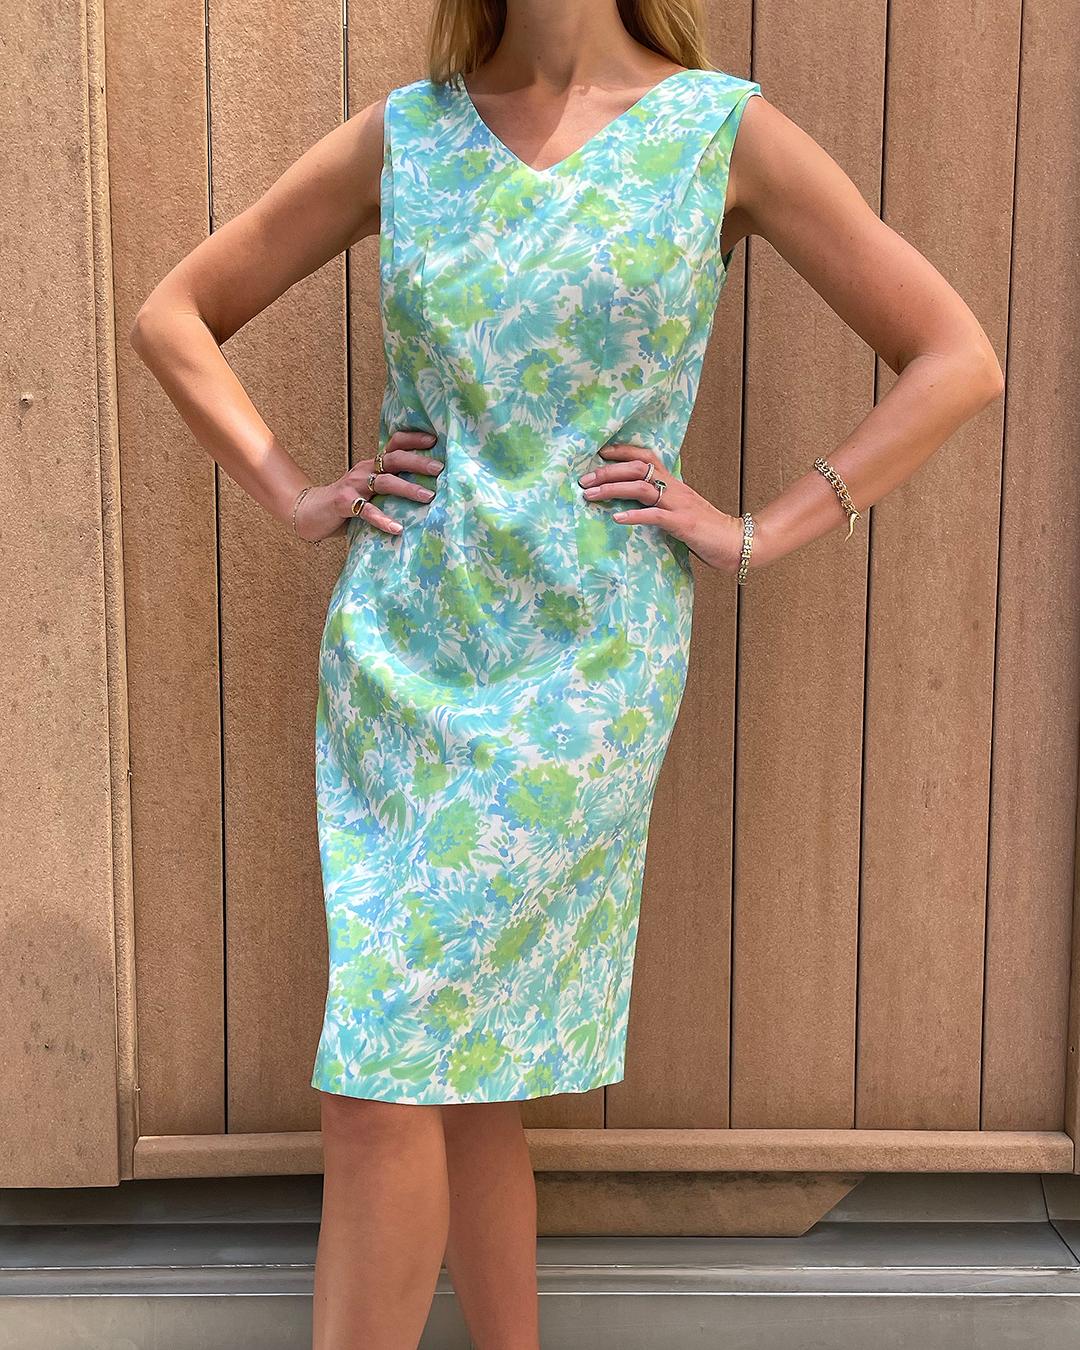 labor required. Look at the draping from the shoulders, as well as the seams in the back, which give shape without taking away from that easy shift silhouette. The fabric is really lightweight and airy, making this the perfect summer dress. Closes